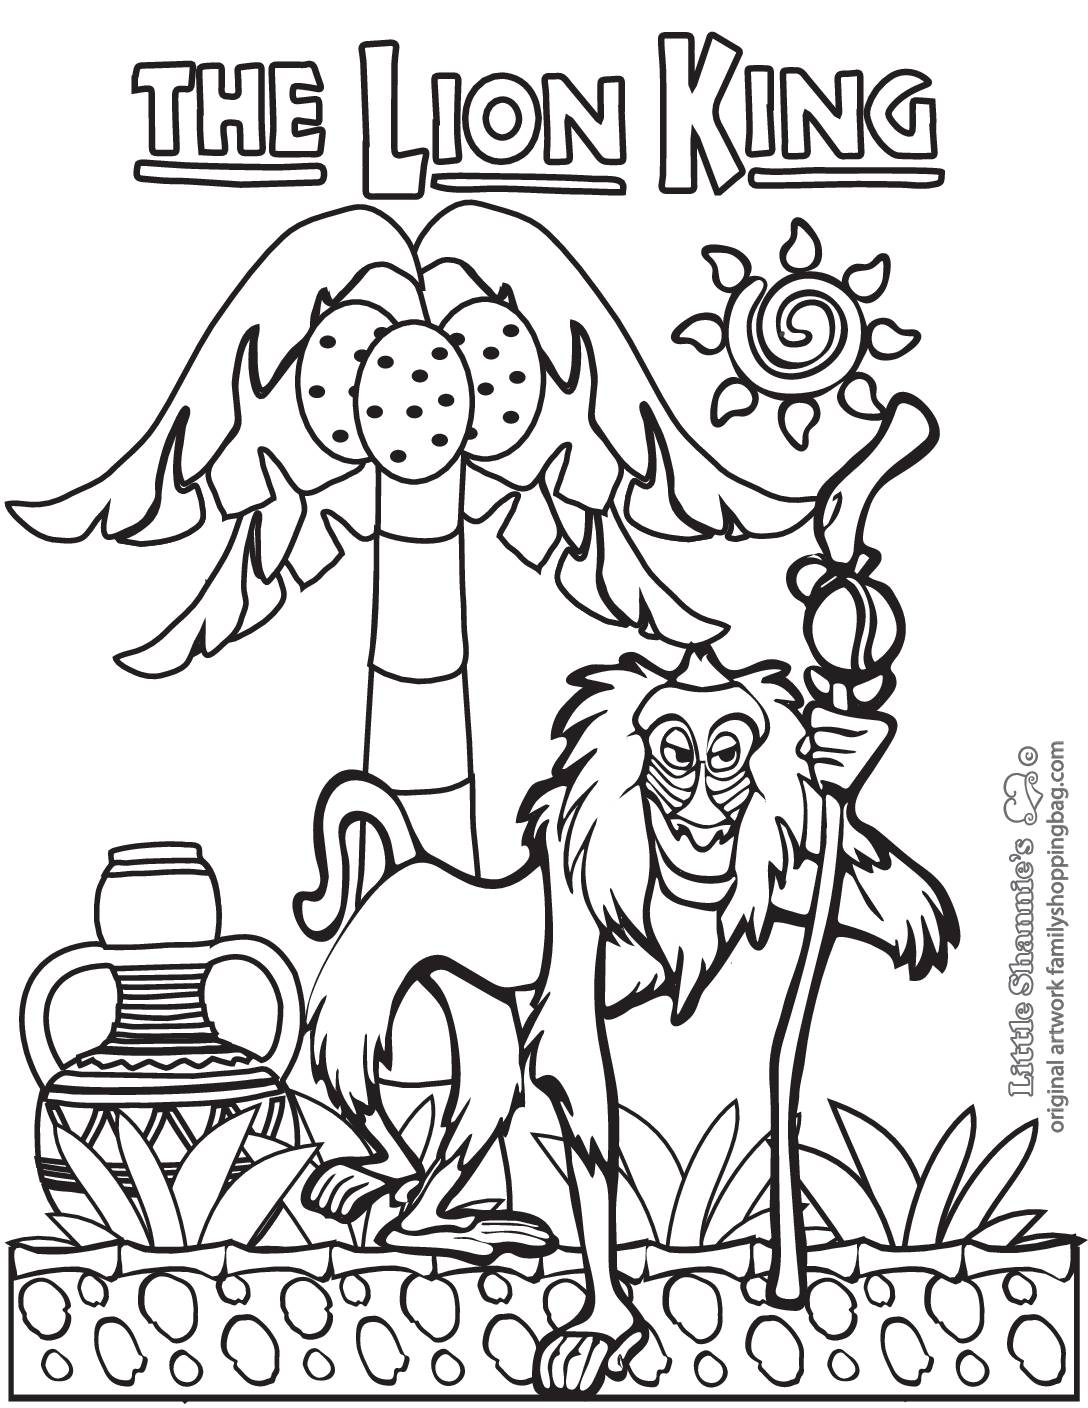 Coloring page lion king